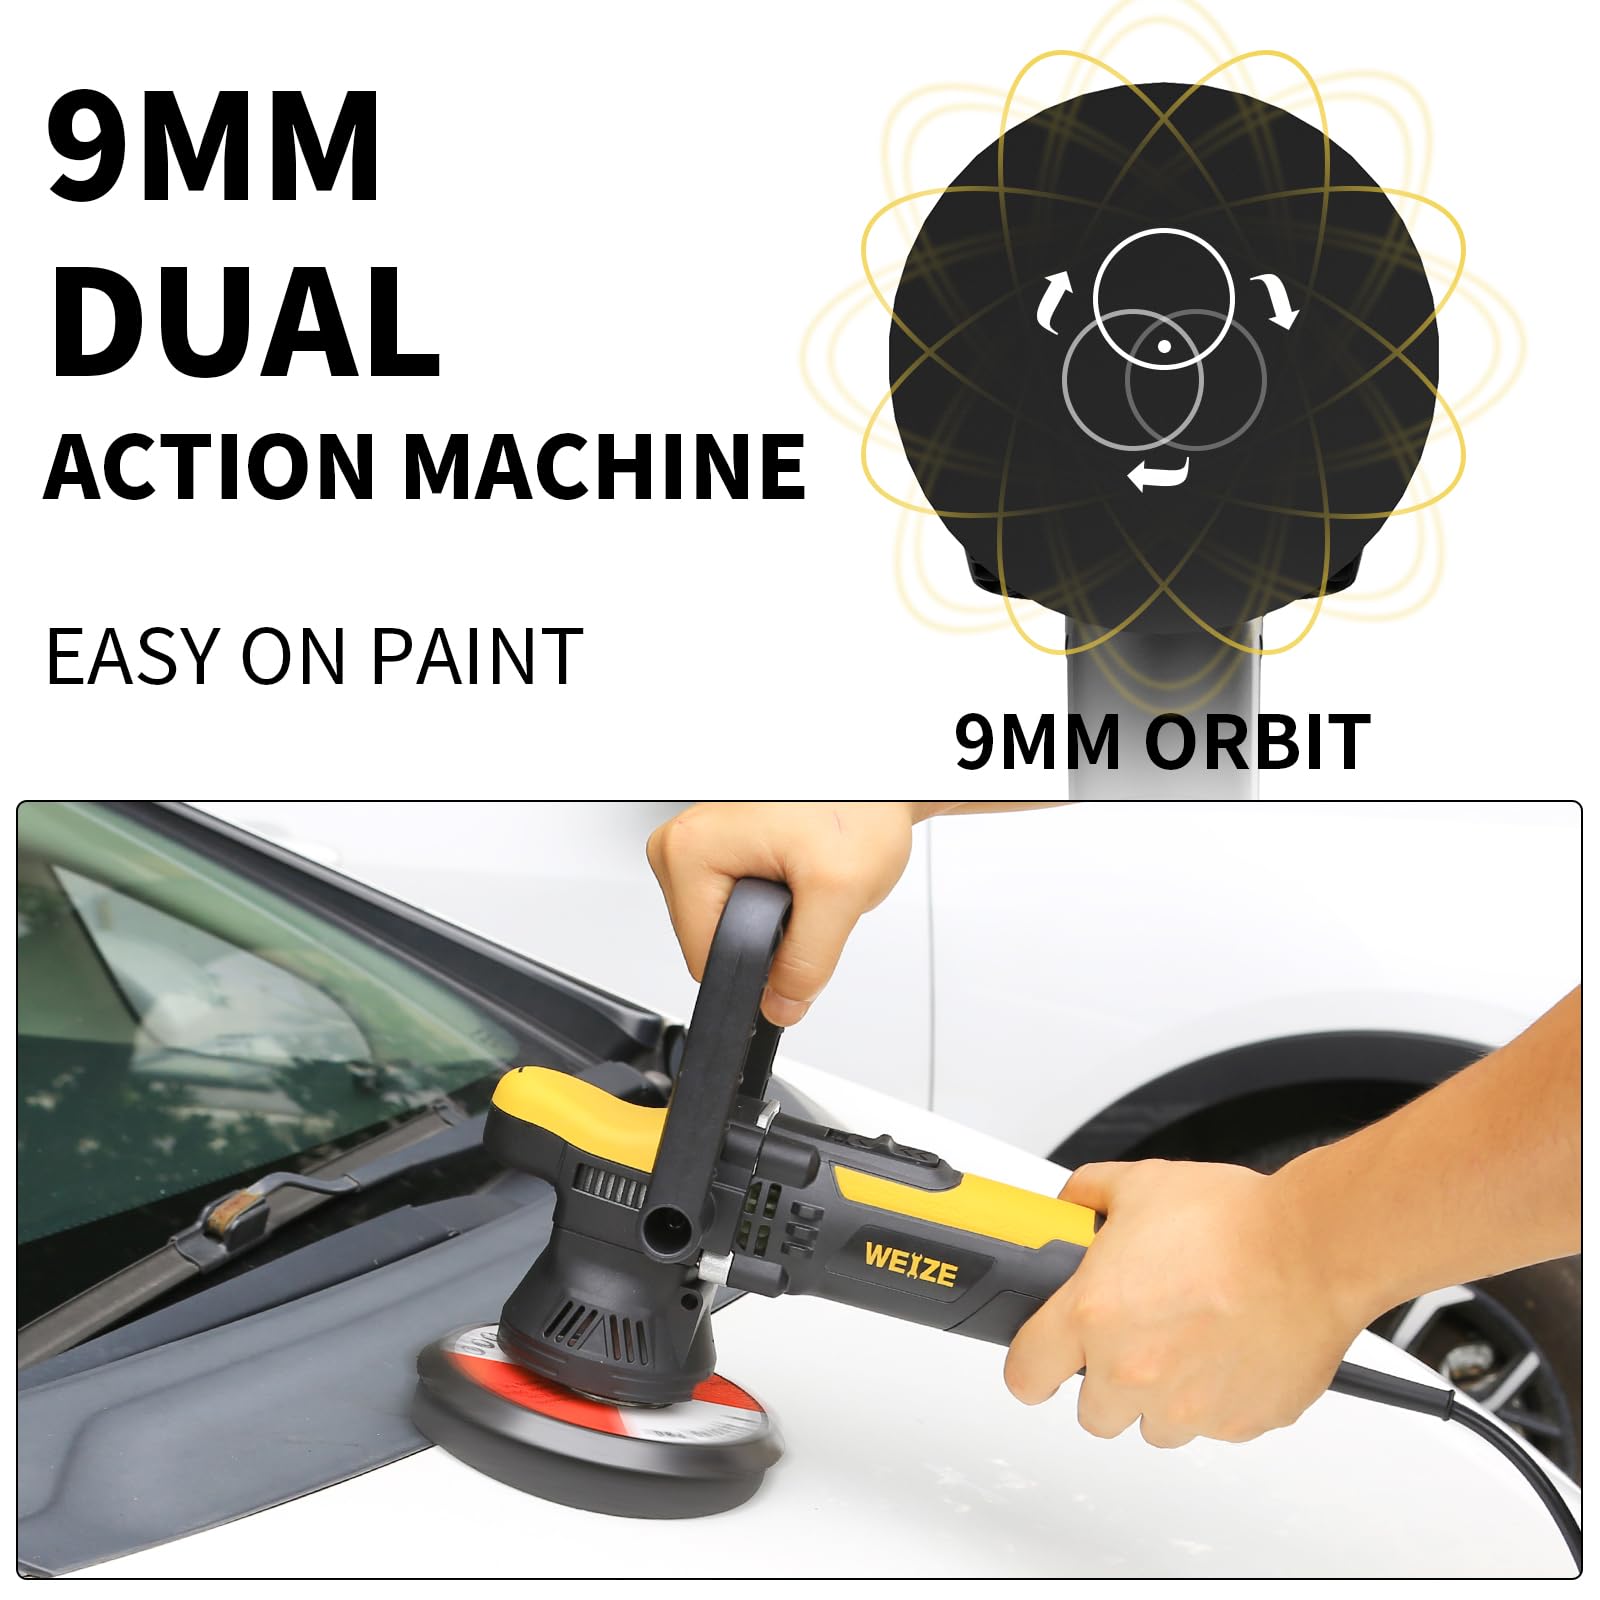 WEIZE Dual Action Polisher, 5 /6 Inch Random Orbital Buffer Polisher for Car Detailing, 2000-6400 OPM, 6 Variable Speed with Detachable Pads, Polishes & Compounds Kit Perfect for Boat, Car Polishing